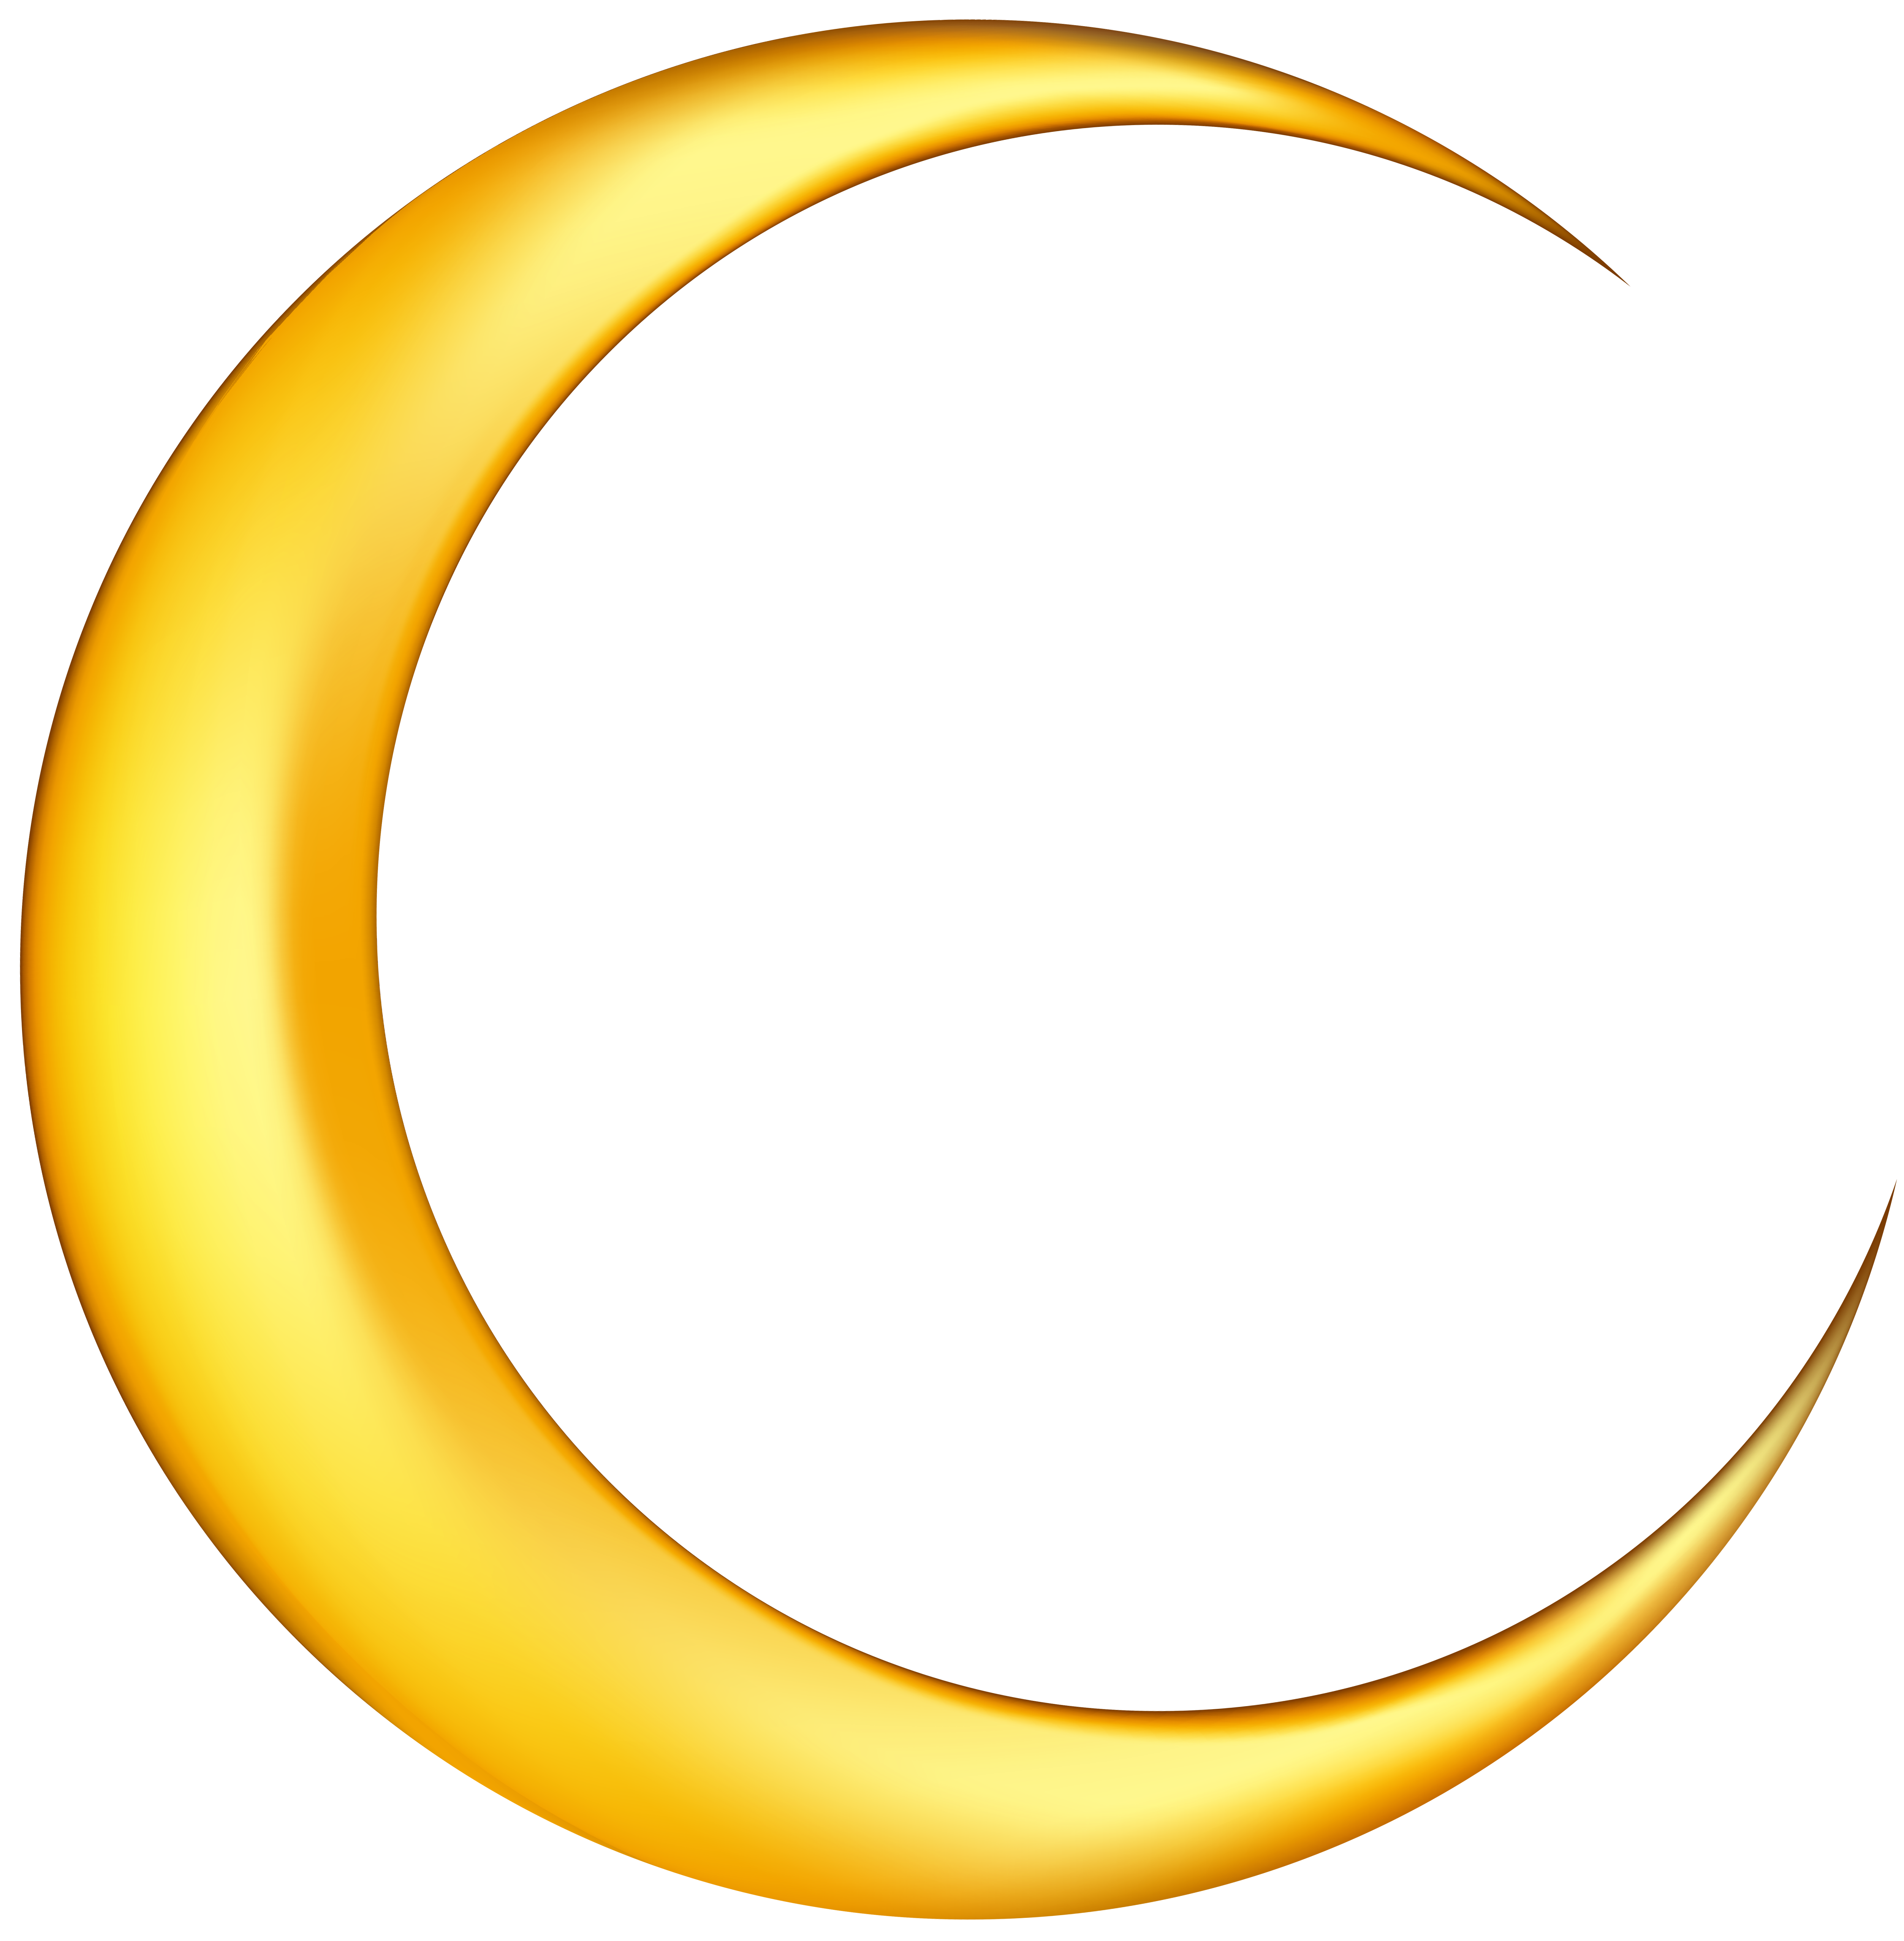 Collection of Crescent moon clipart Free download best Crescent moon